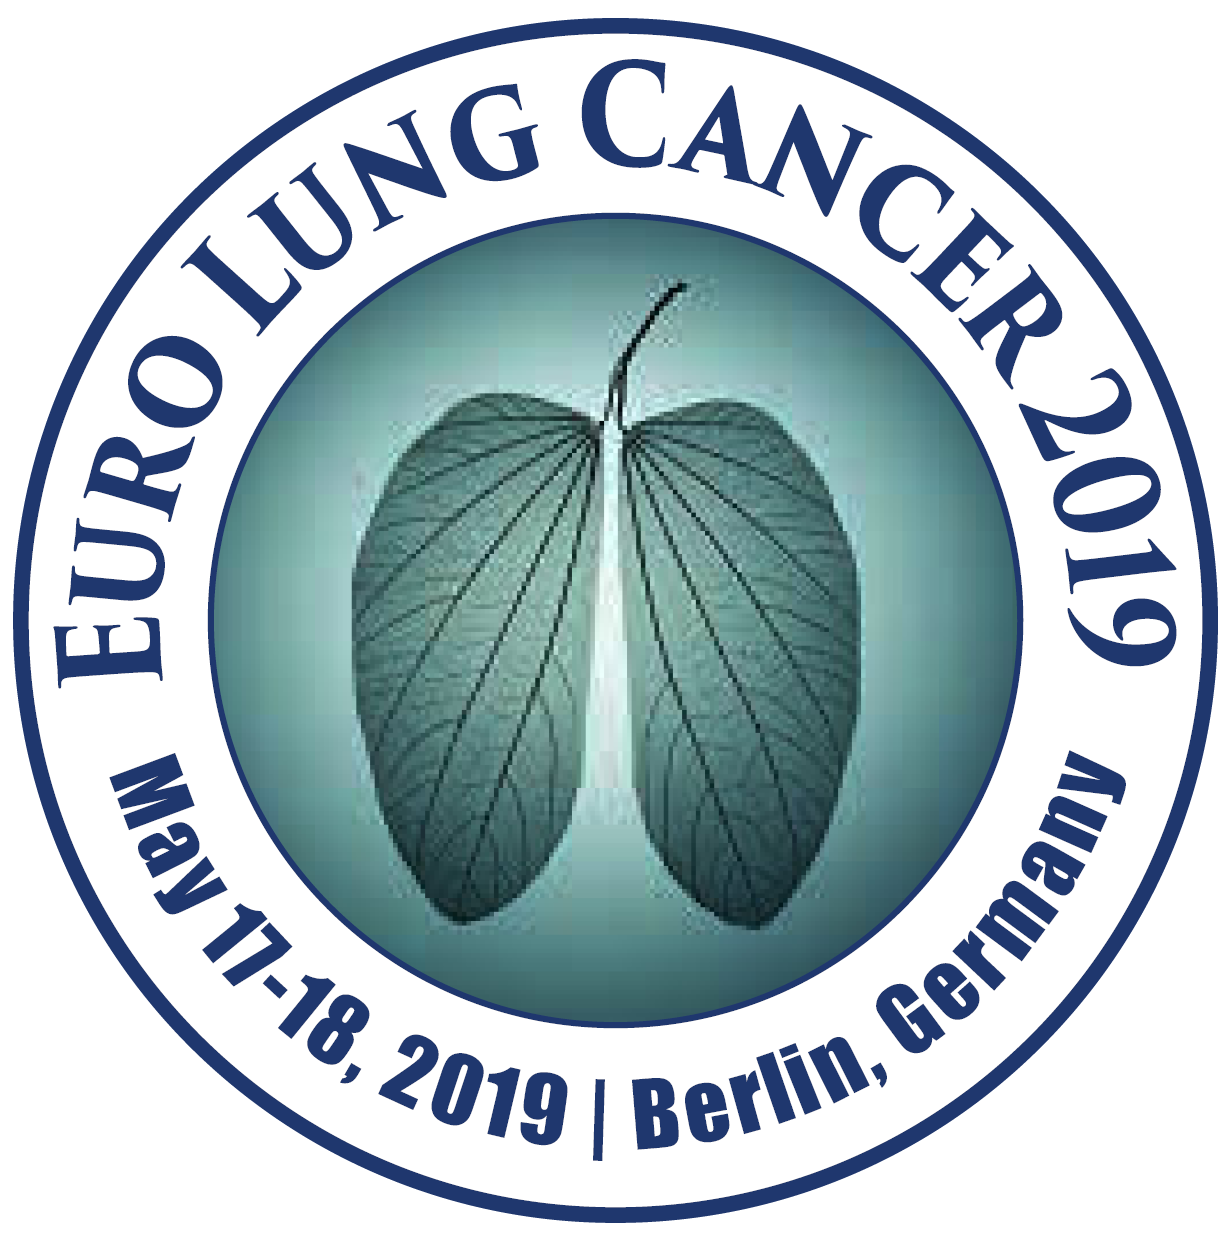 Lung Cancer and Therapies Meet 2019